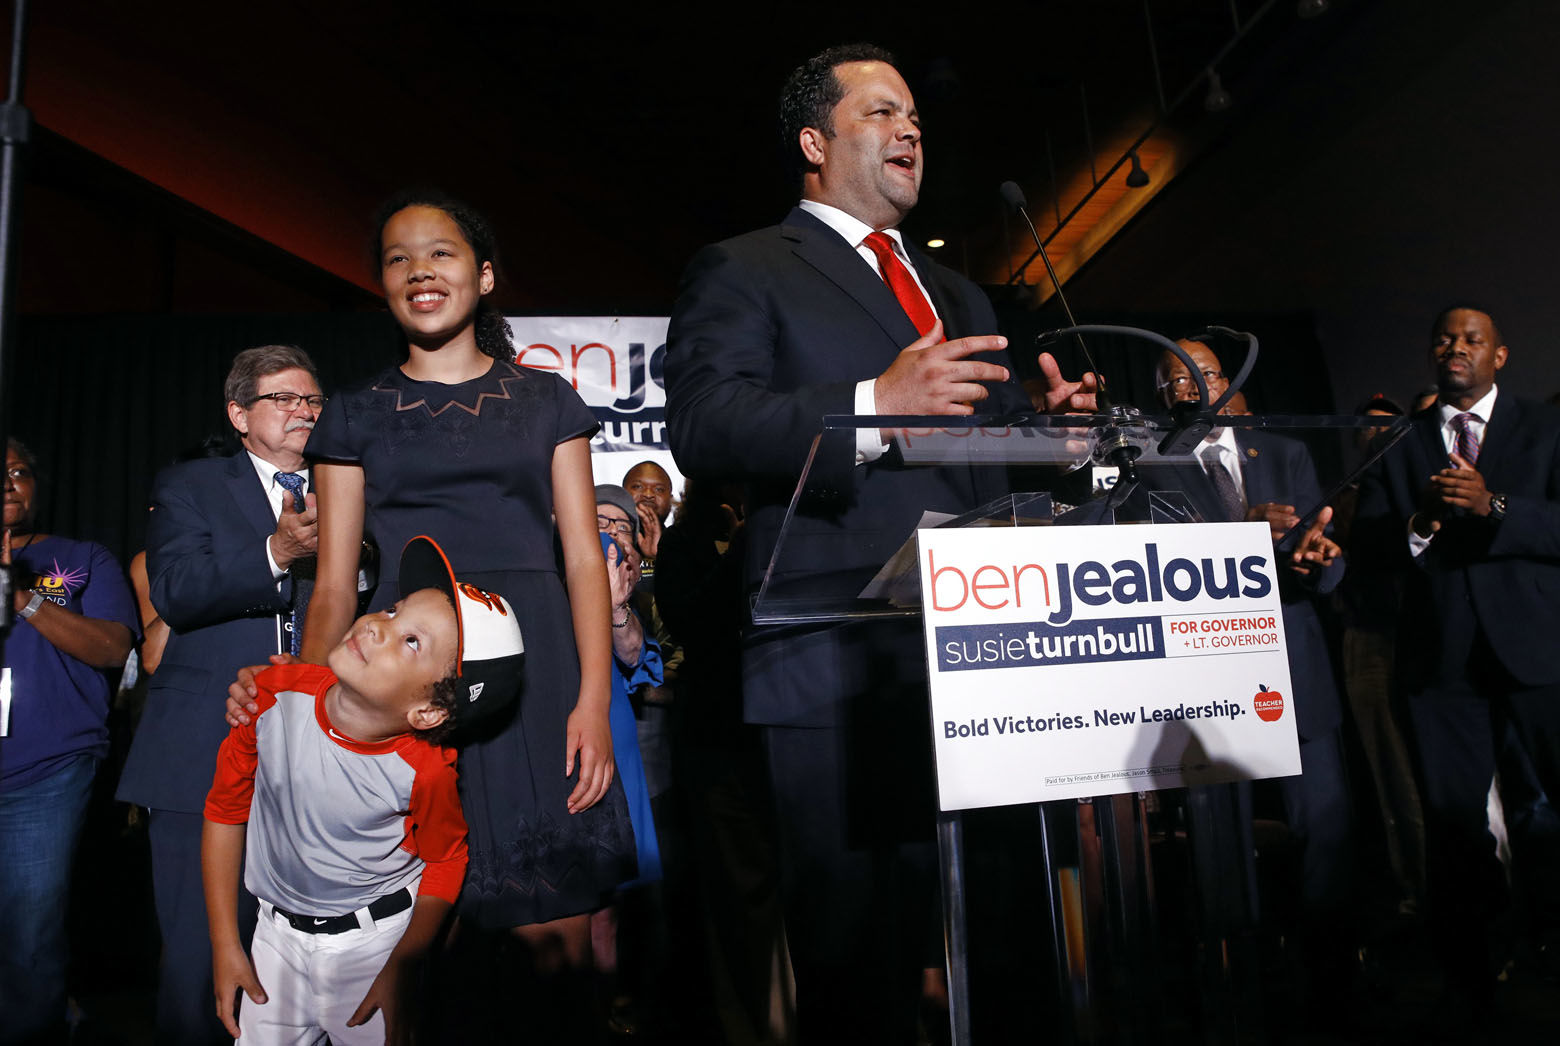 Maryland Democratic gubernatorial candidate Ben Jealous, right, addresses supporters as his son Jack, left, looks at his reflection in a teleprompter screen at an election night party, Tuesday, June 26, 2018, in Baltimore. Also pictured is Jealous' daughter, Morgan, second from left. Jealous won the Democratic nomination for governor in Maryland, setting up a battle against popular incumbent Republican Gov. Larry Hogan in the fall. (AP Photo/Patrick Semansky)